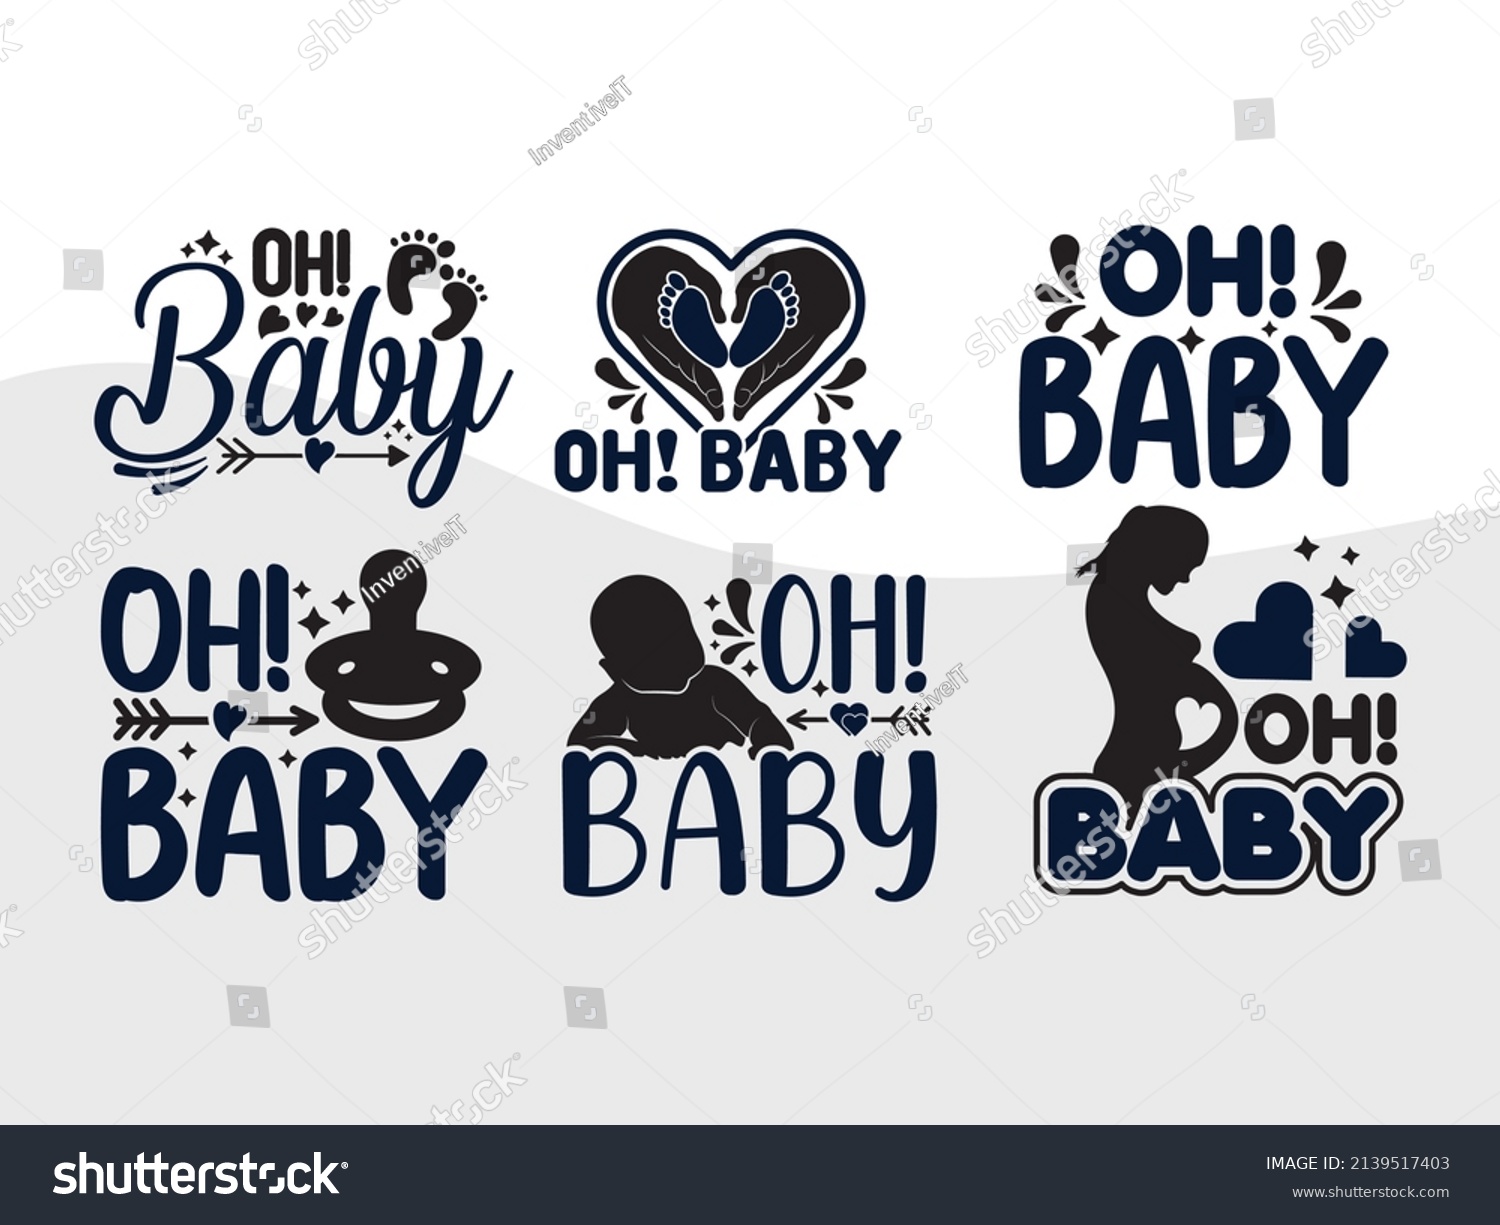 SVG of Oh Baby Printable Vector Illustration svg